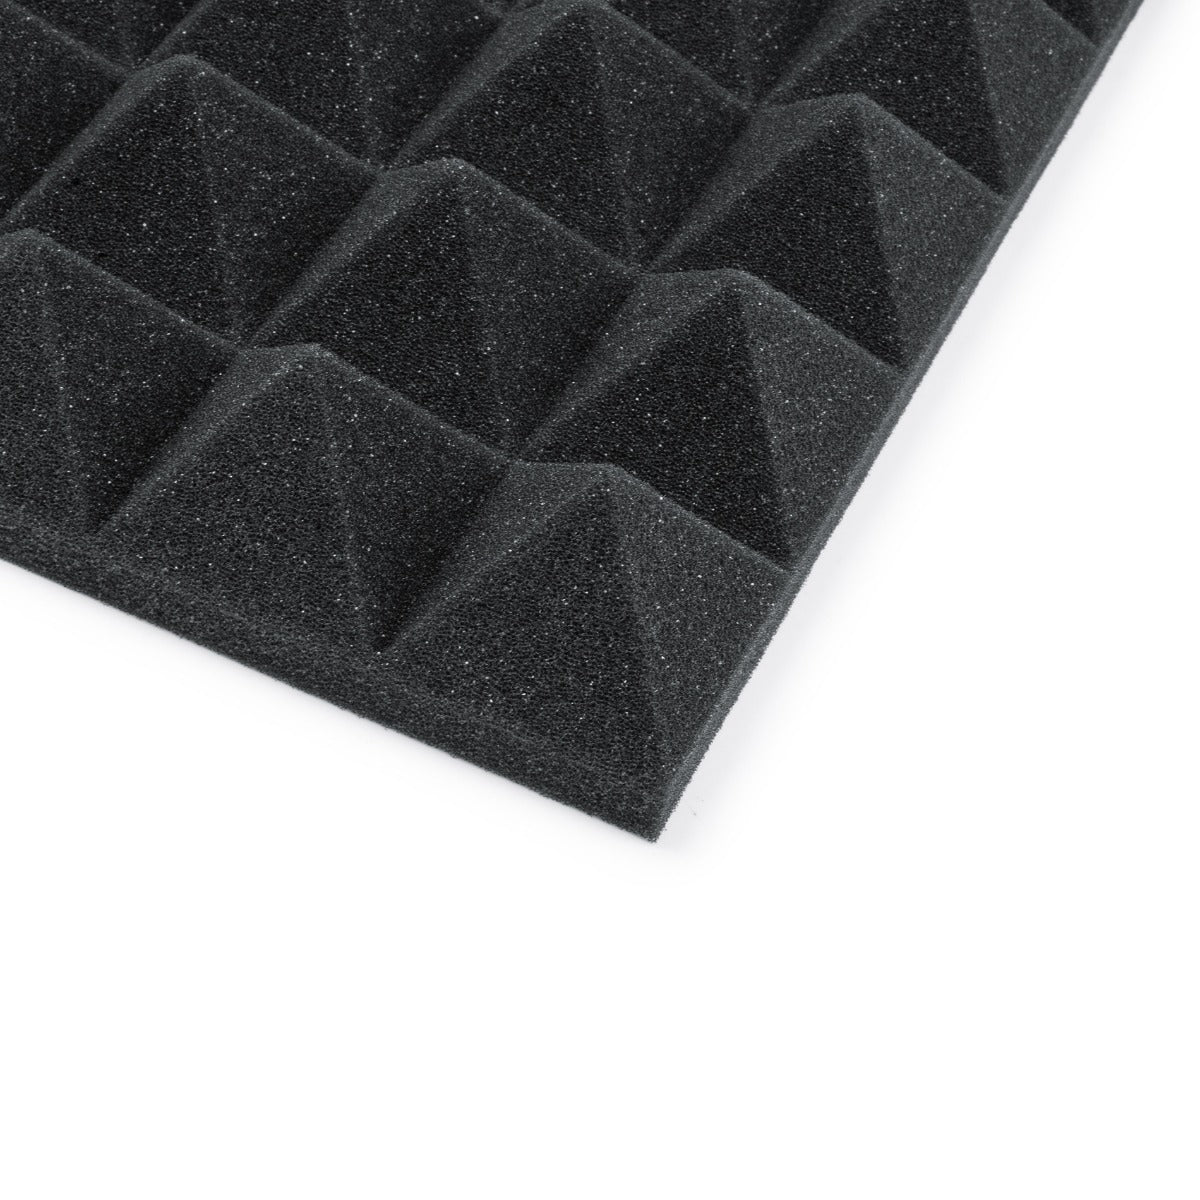 Image of the corner of a single acoustic foam panel